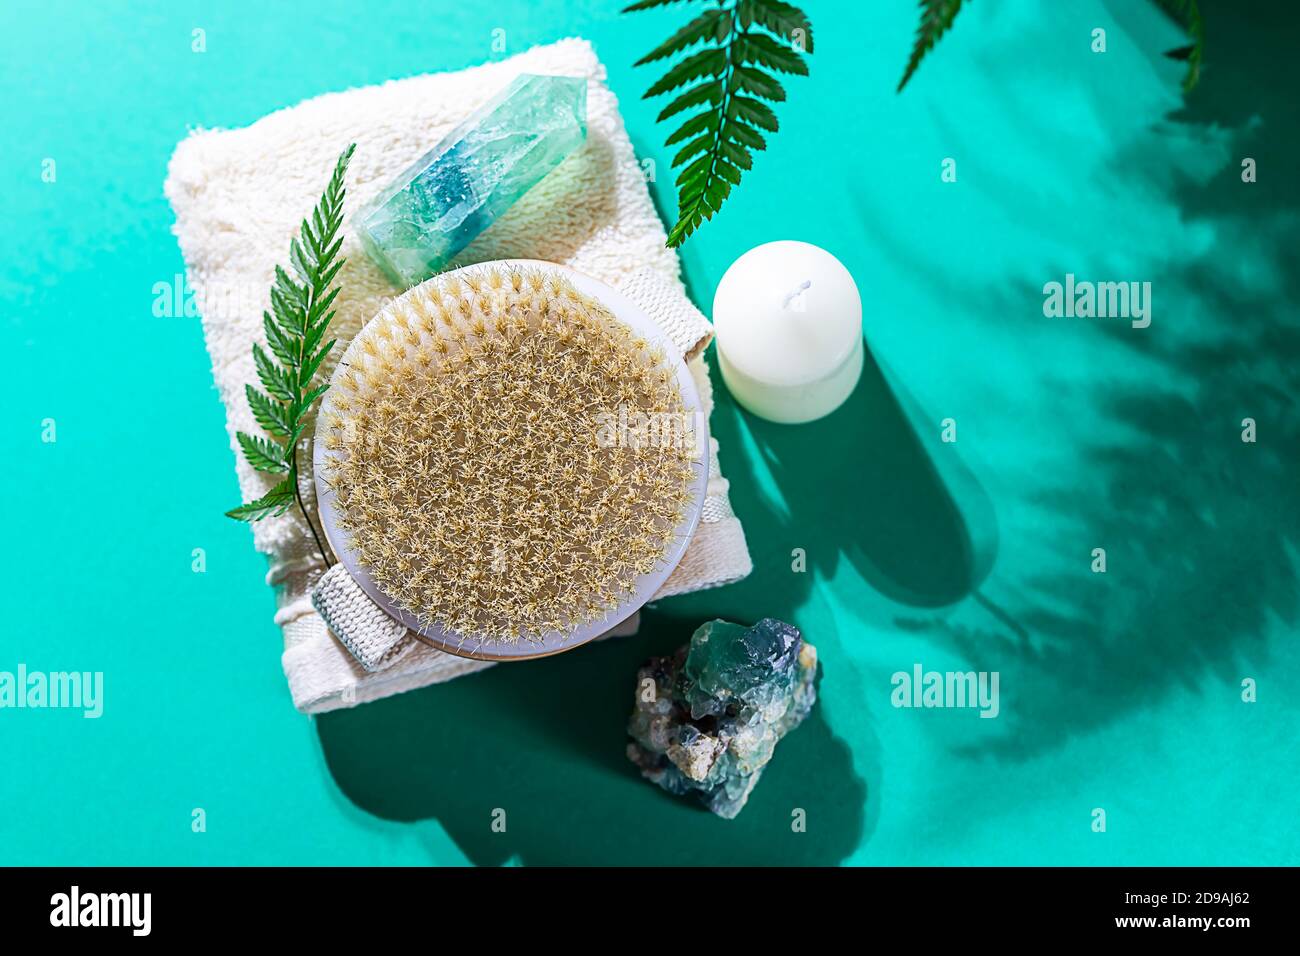 Natural organic wooden body massage brush, crystals, towel, fern leaves with natural sunlight. Home Spa Therapy. Stock Photo